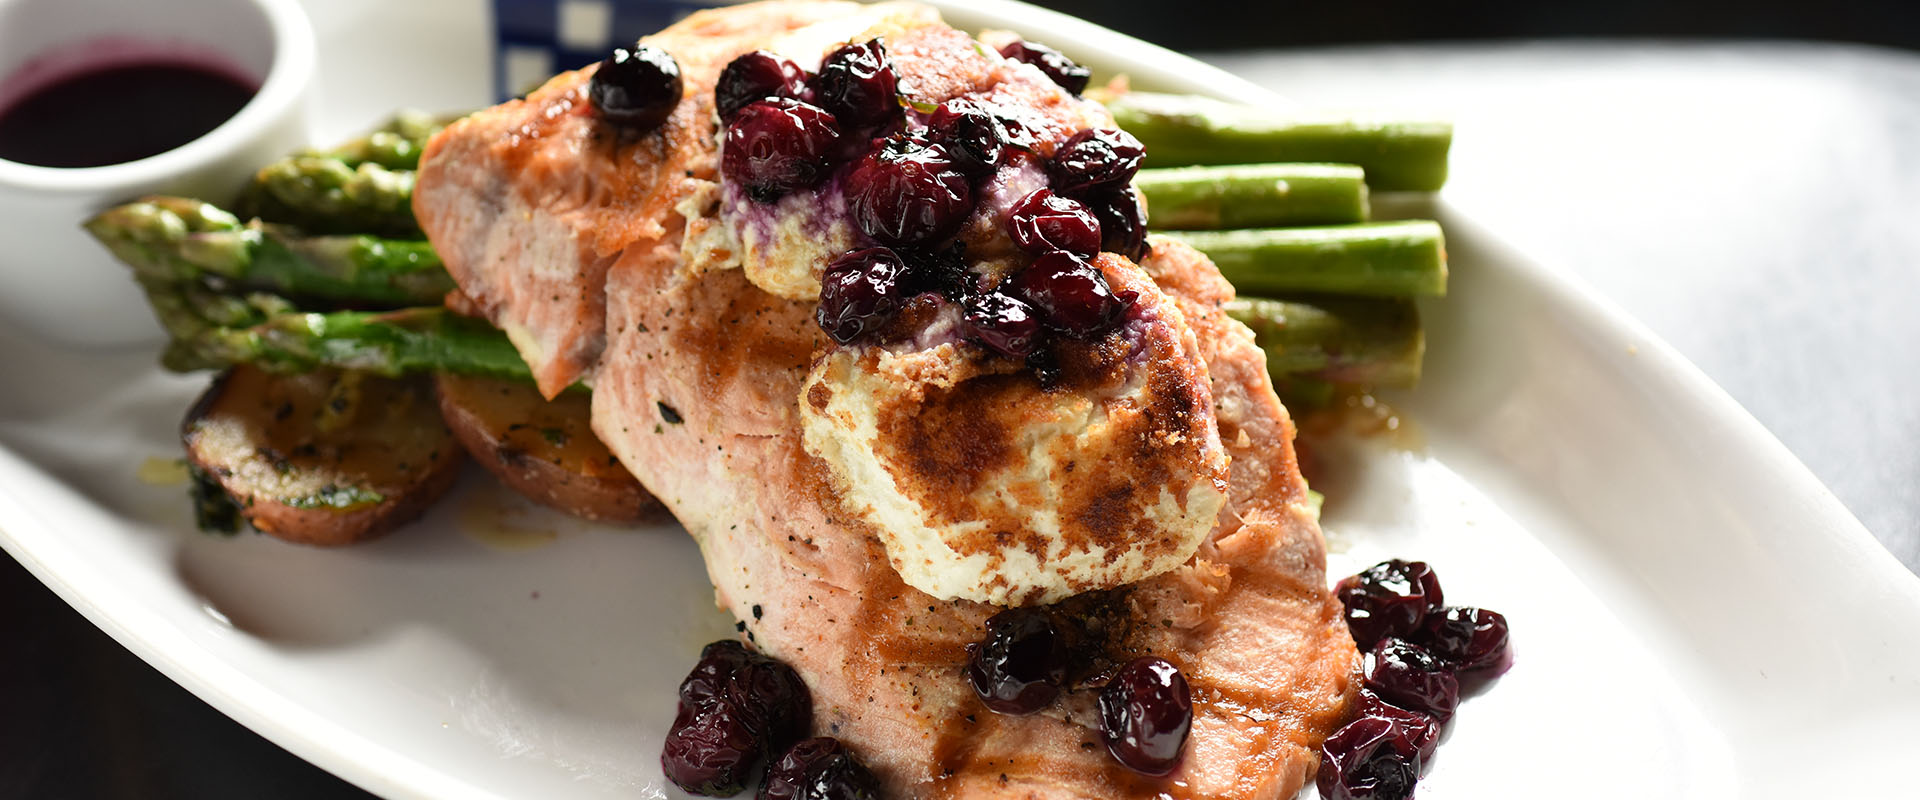 Duke's Seafood Wild Salmon with Cherries and Asparagus